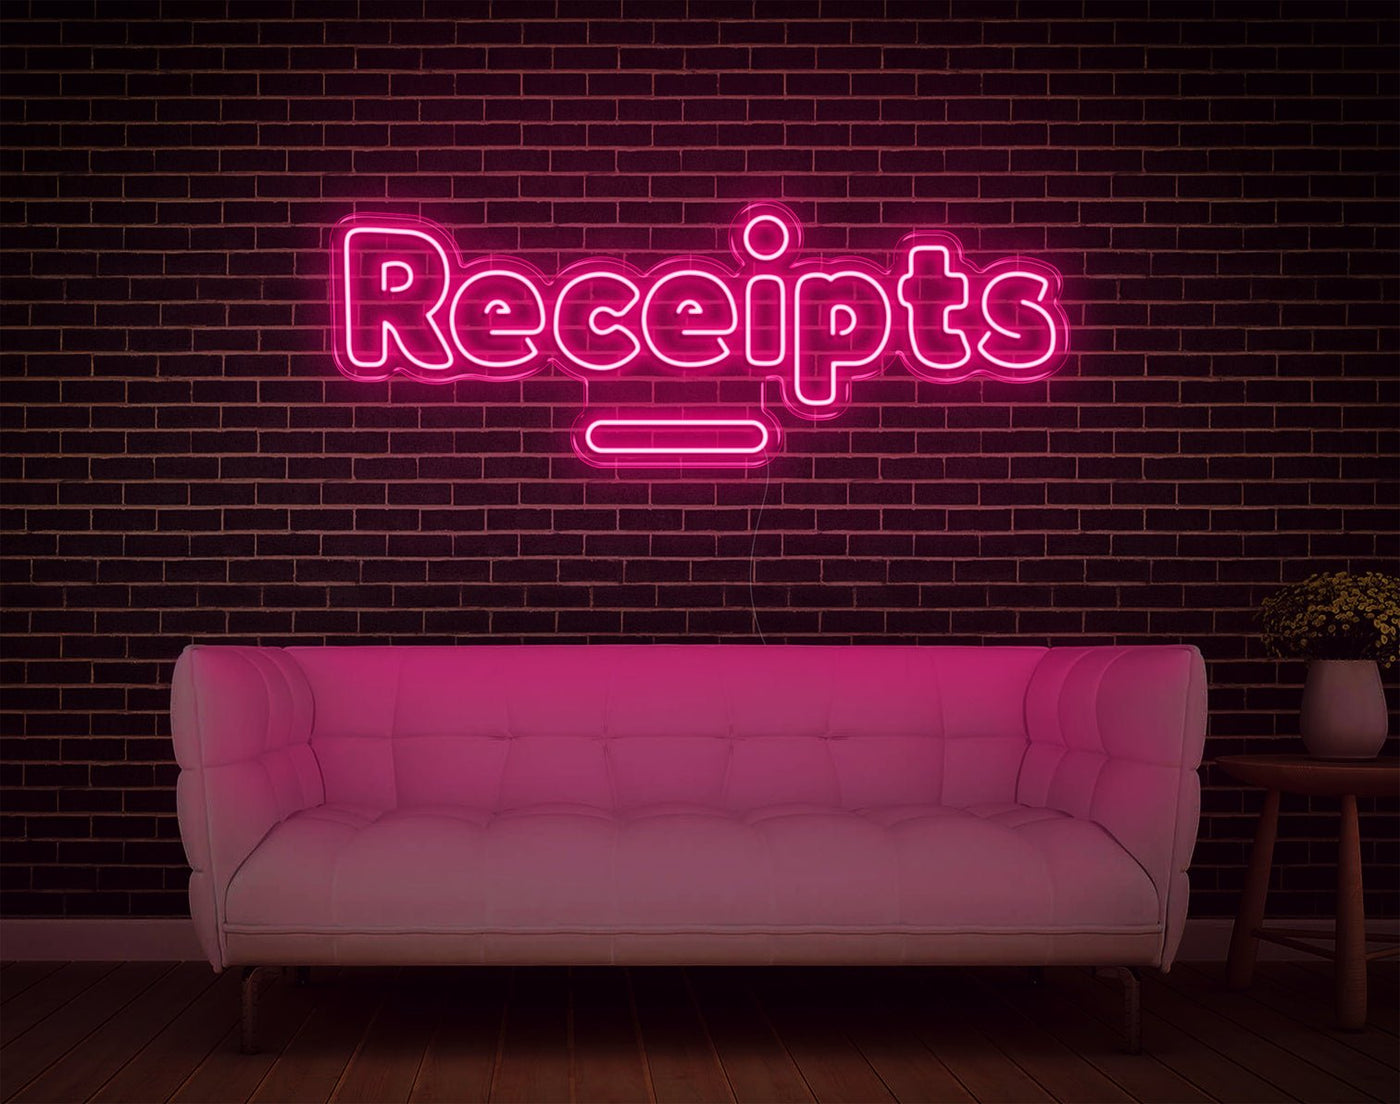 Receipts LED Neon Sign - 6inch x 17inchHot Pink